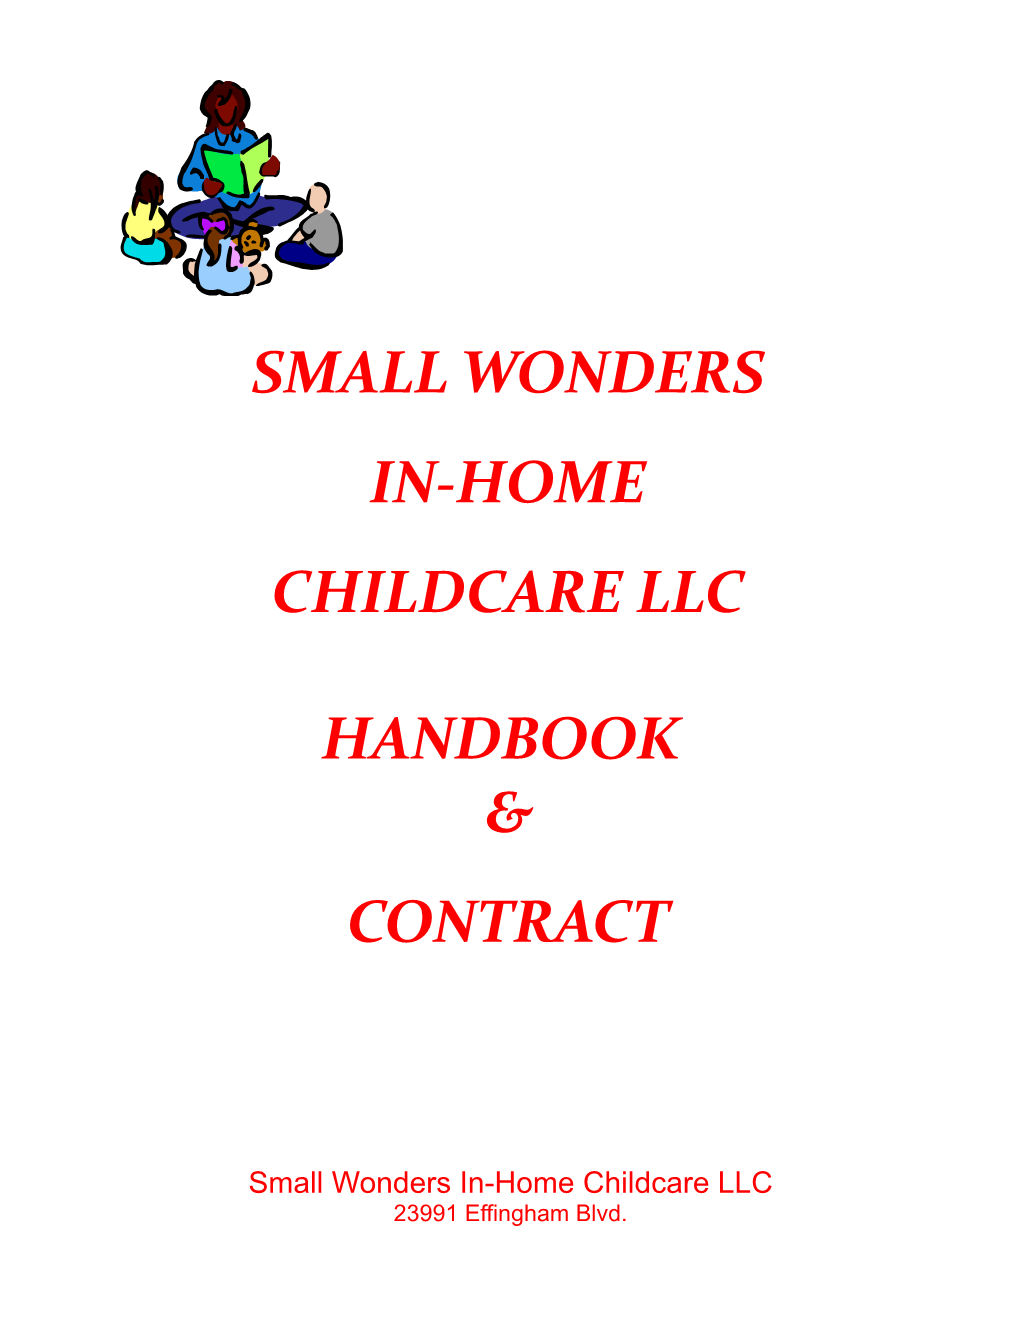 Small Wonders In-Home Childcare LLC